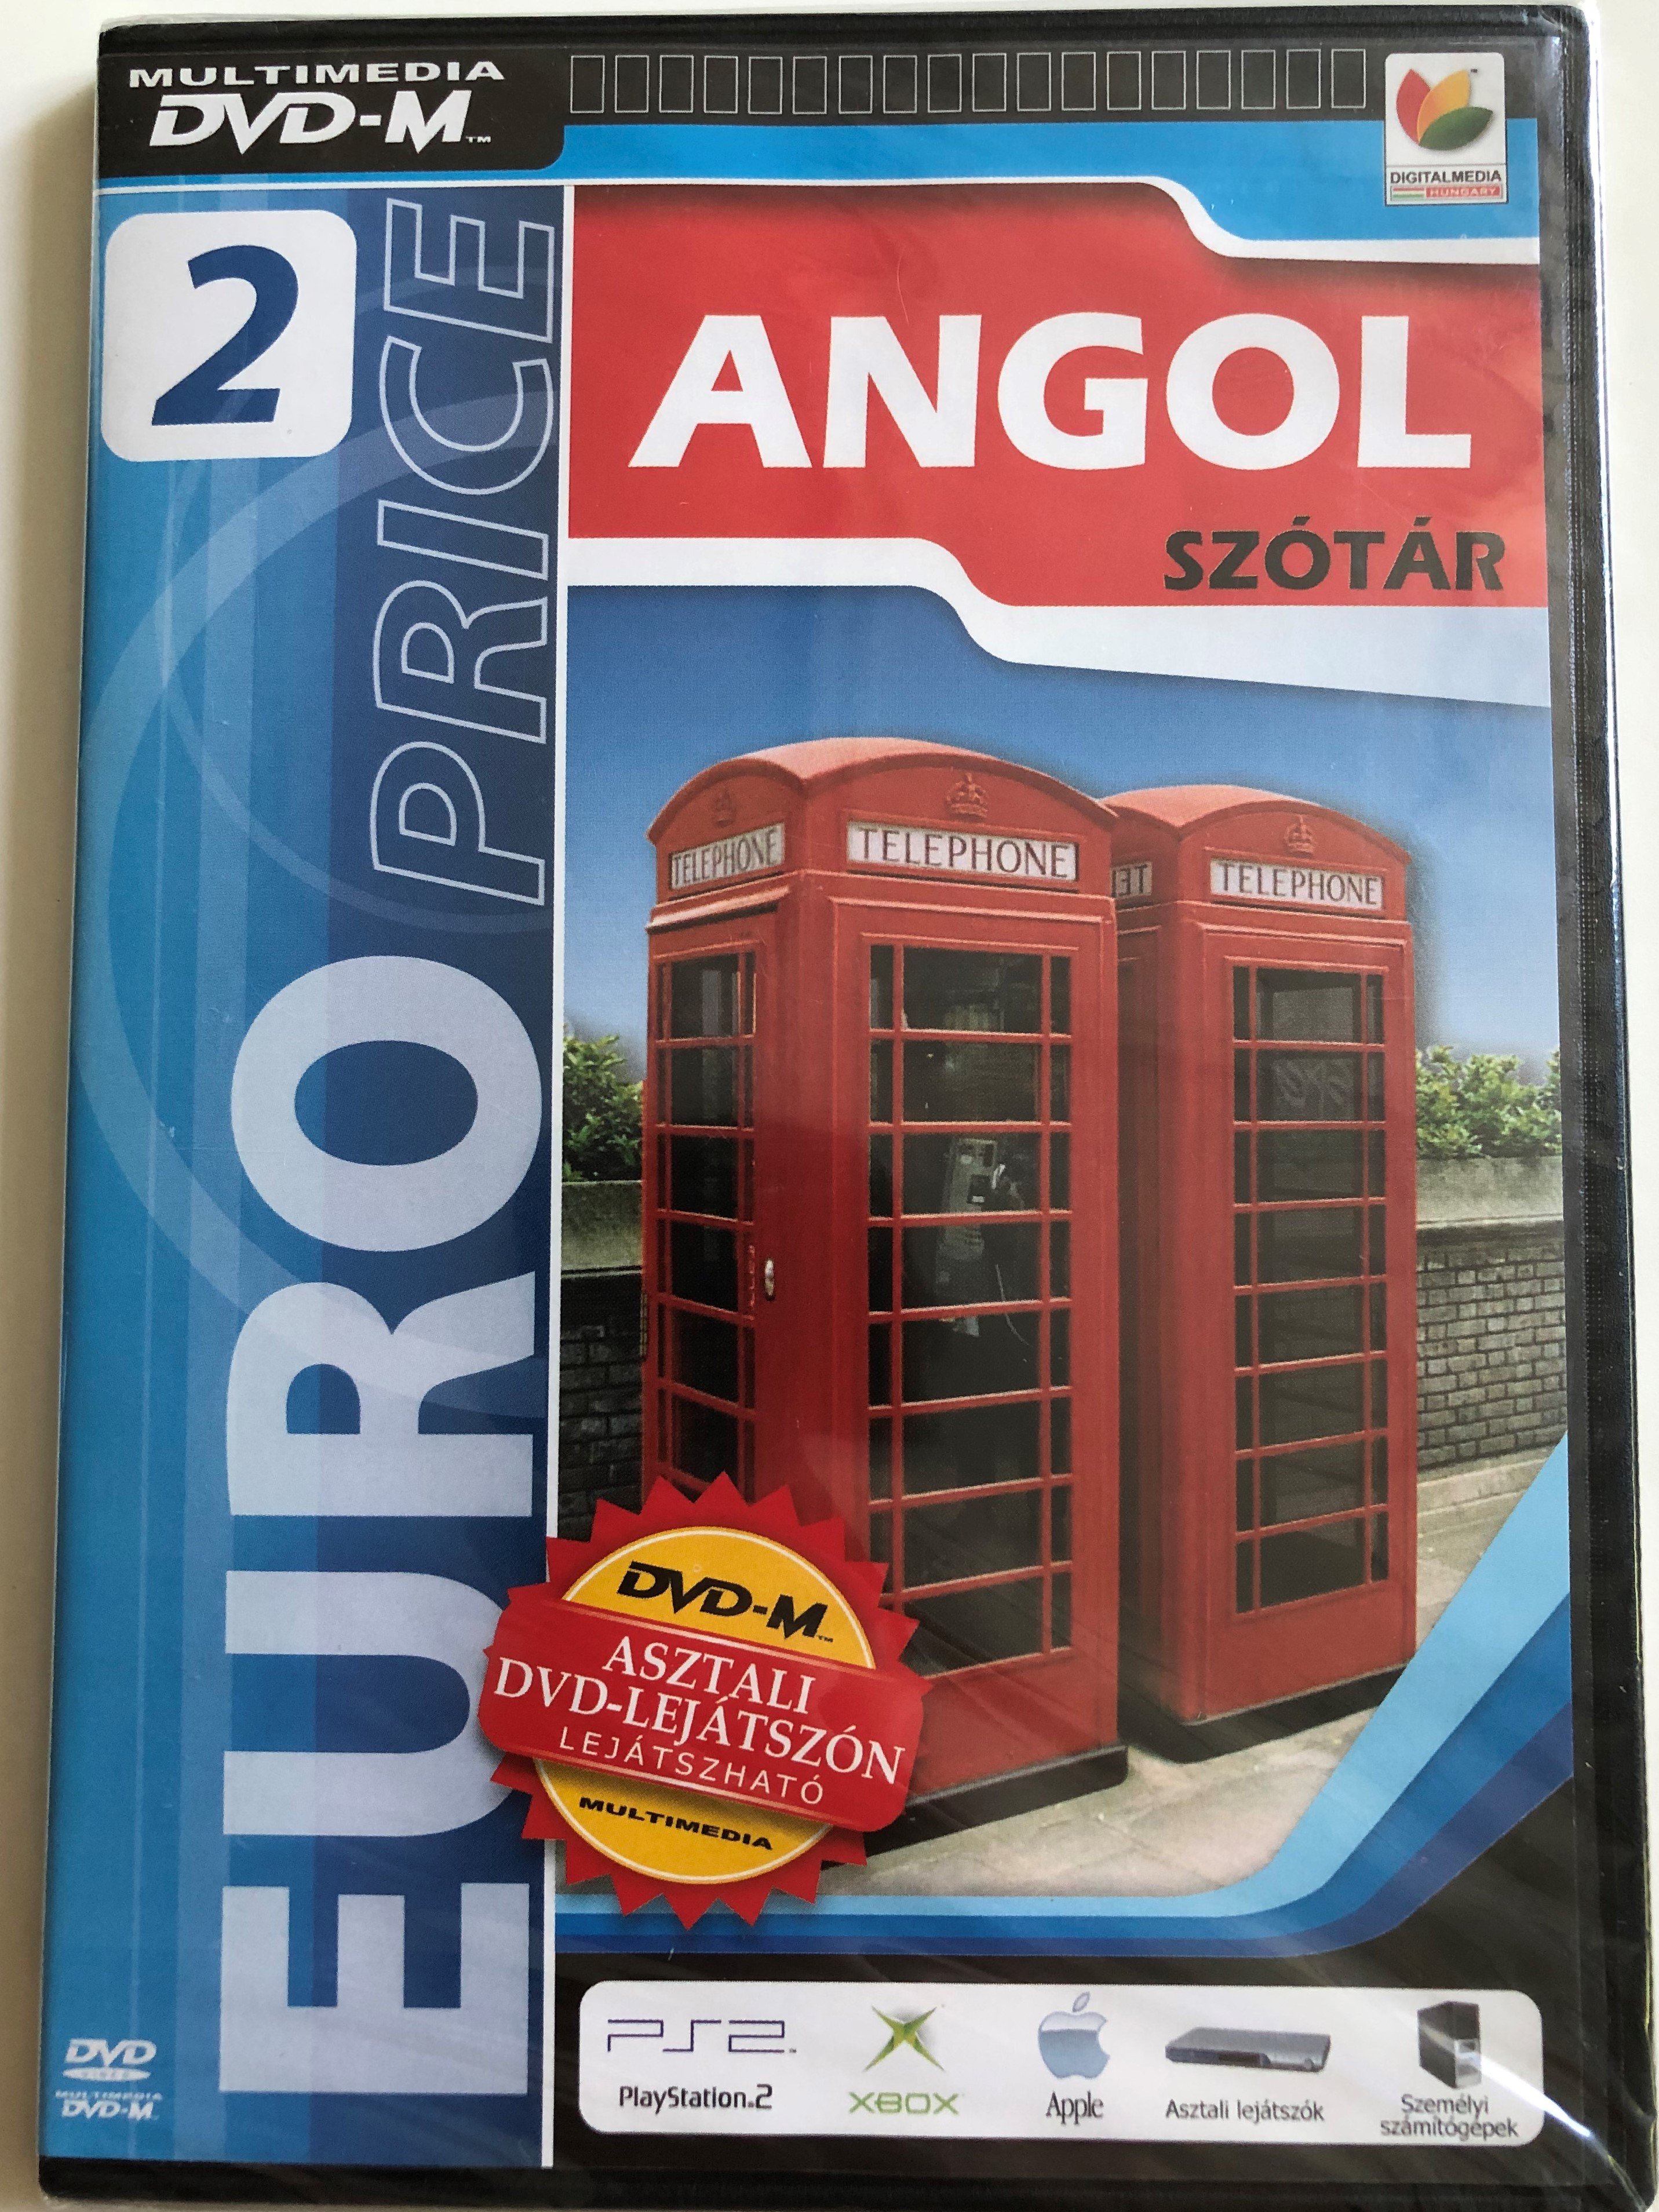 euro-price-2-angol-sz-t-r-english-dictionary-dvd-m-2006-can-be-played-on-dvd-players-ps2-xbox-mac-and-pc-1-.jpg